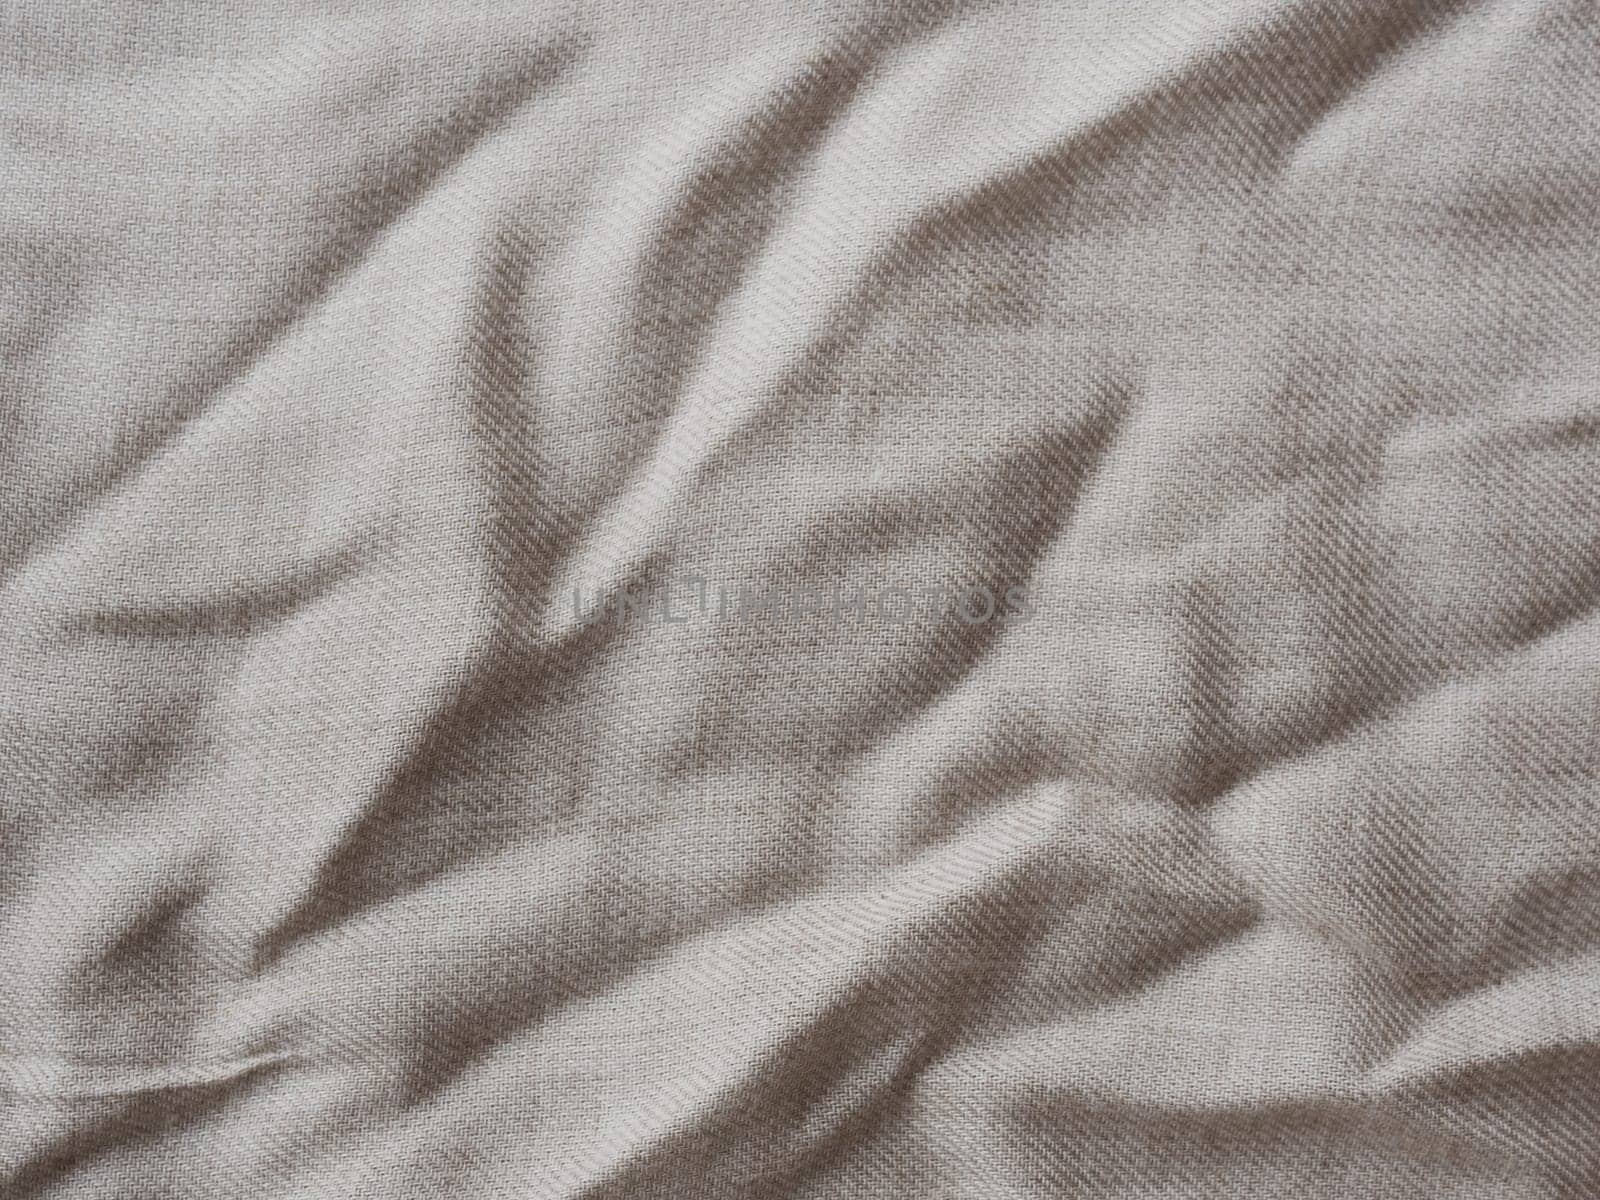 Comfortable style cloth. Minimalistic background for design. Wrinkle beige linen texture. Detailed closeup. Rustic crumpled vintage cotton fabric. Wavy folds natural material.